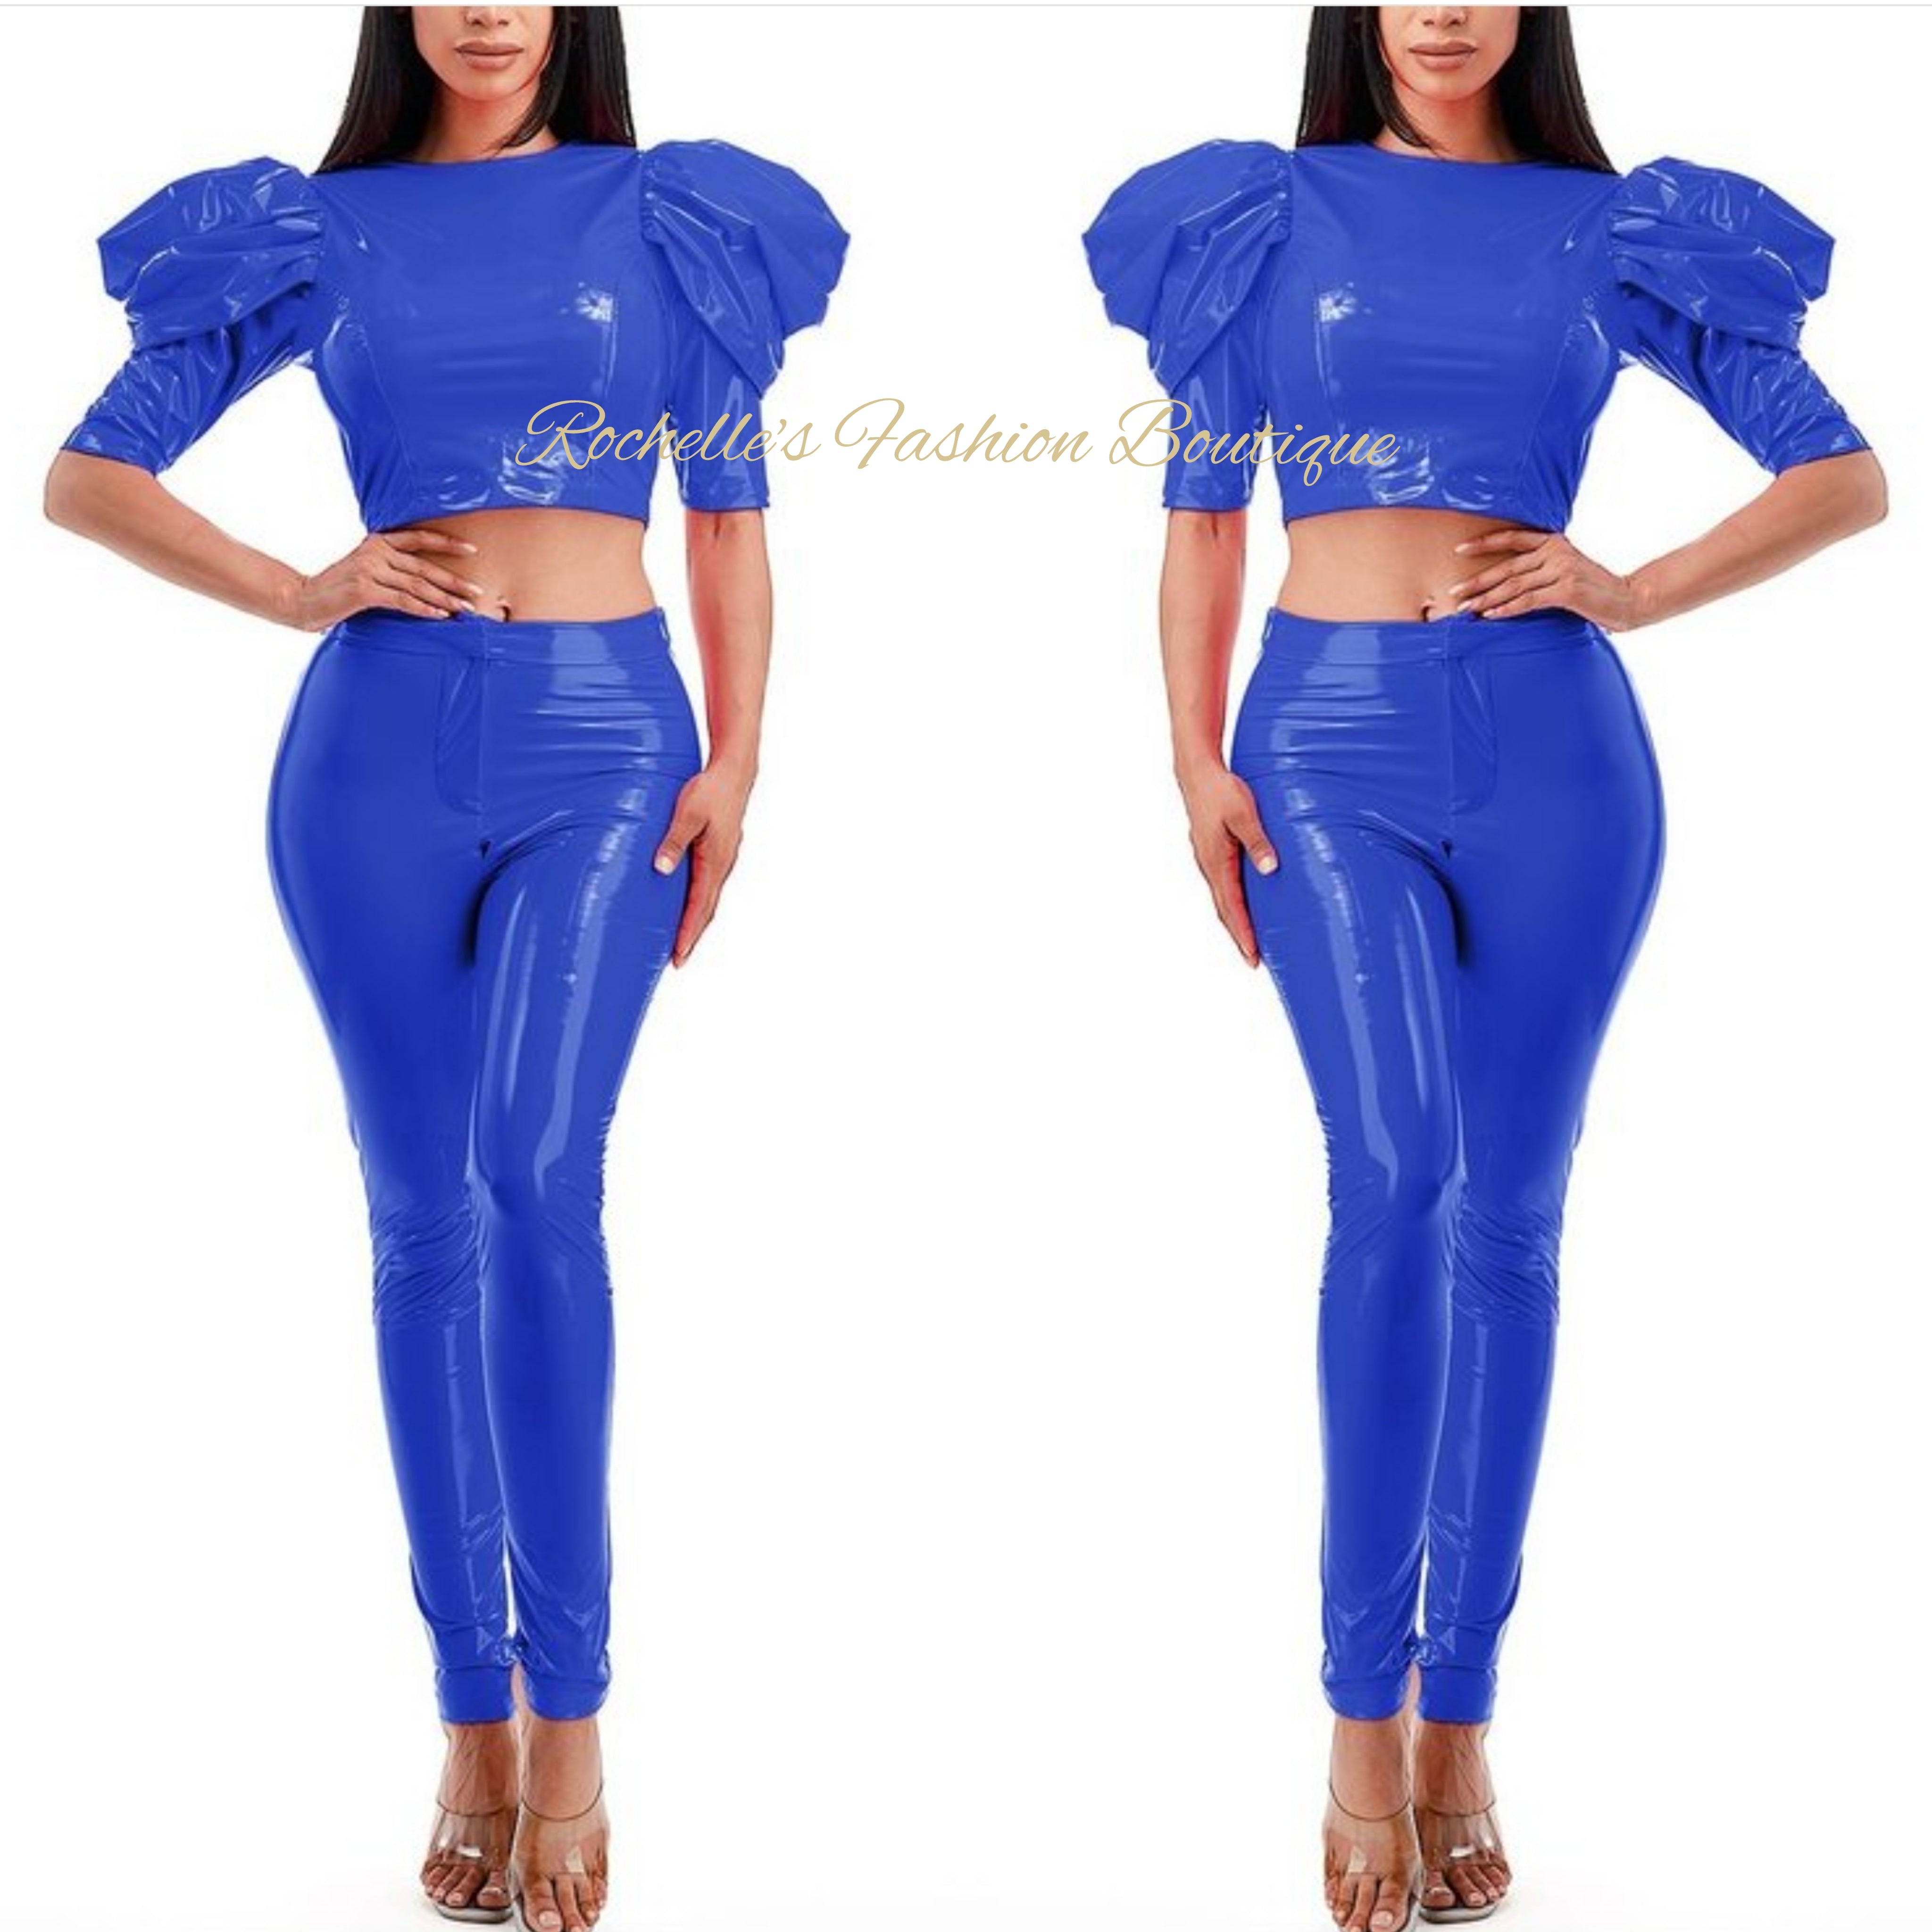 Red Leather Puff S/S Crop Top Pants Set